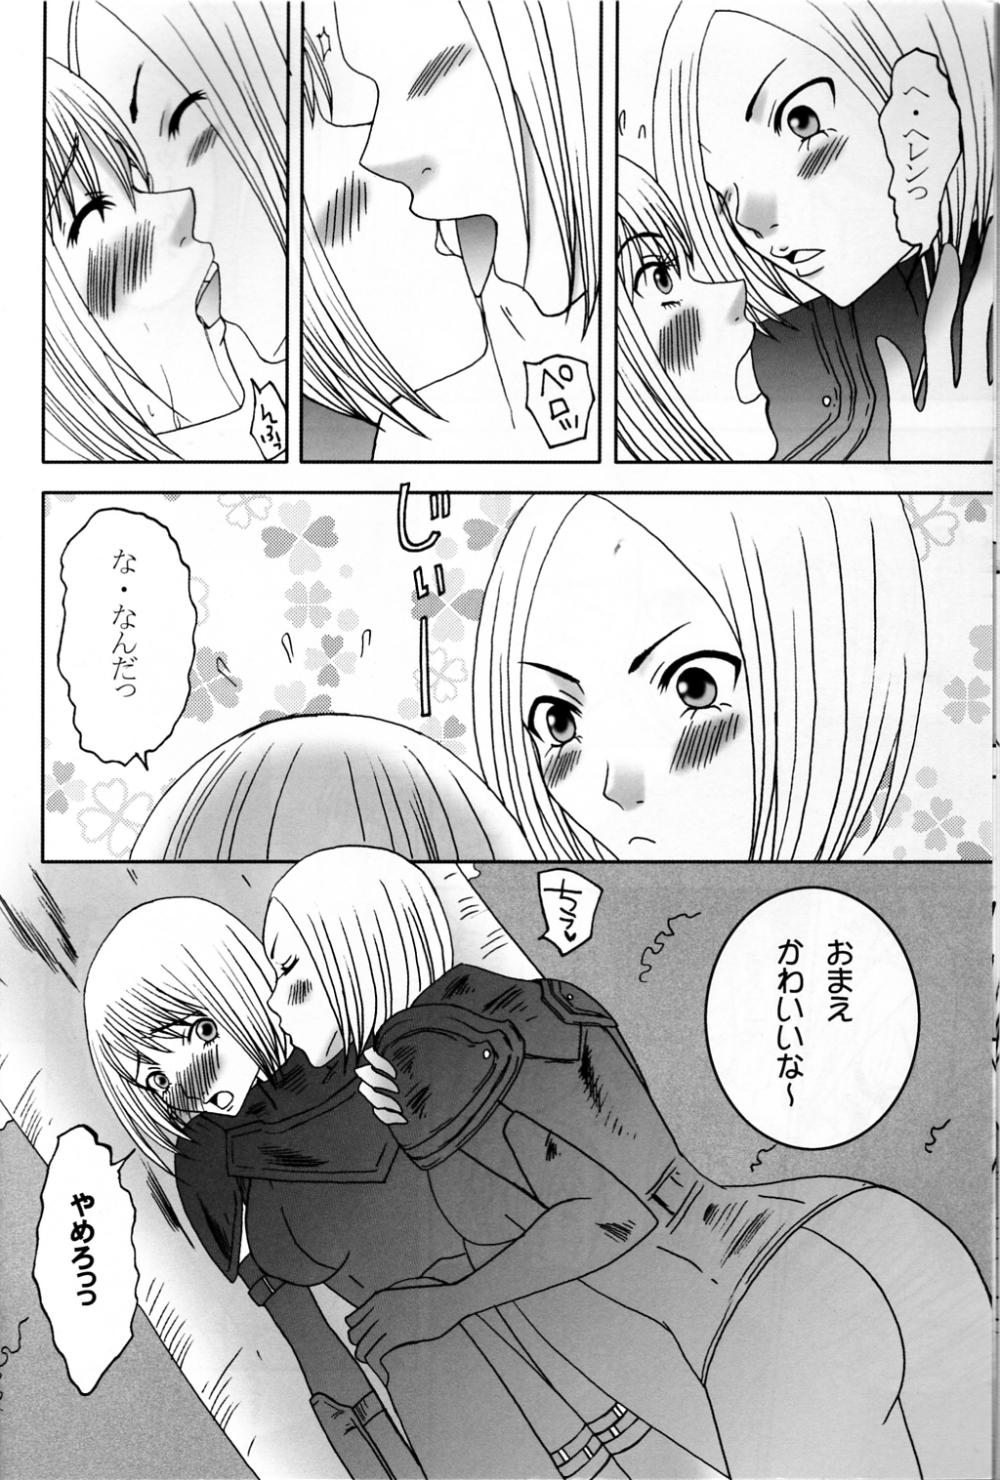 Group Koyoi no Utage - Claymore Oldvsyoung - Page 7